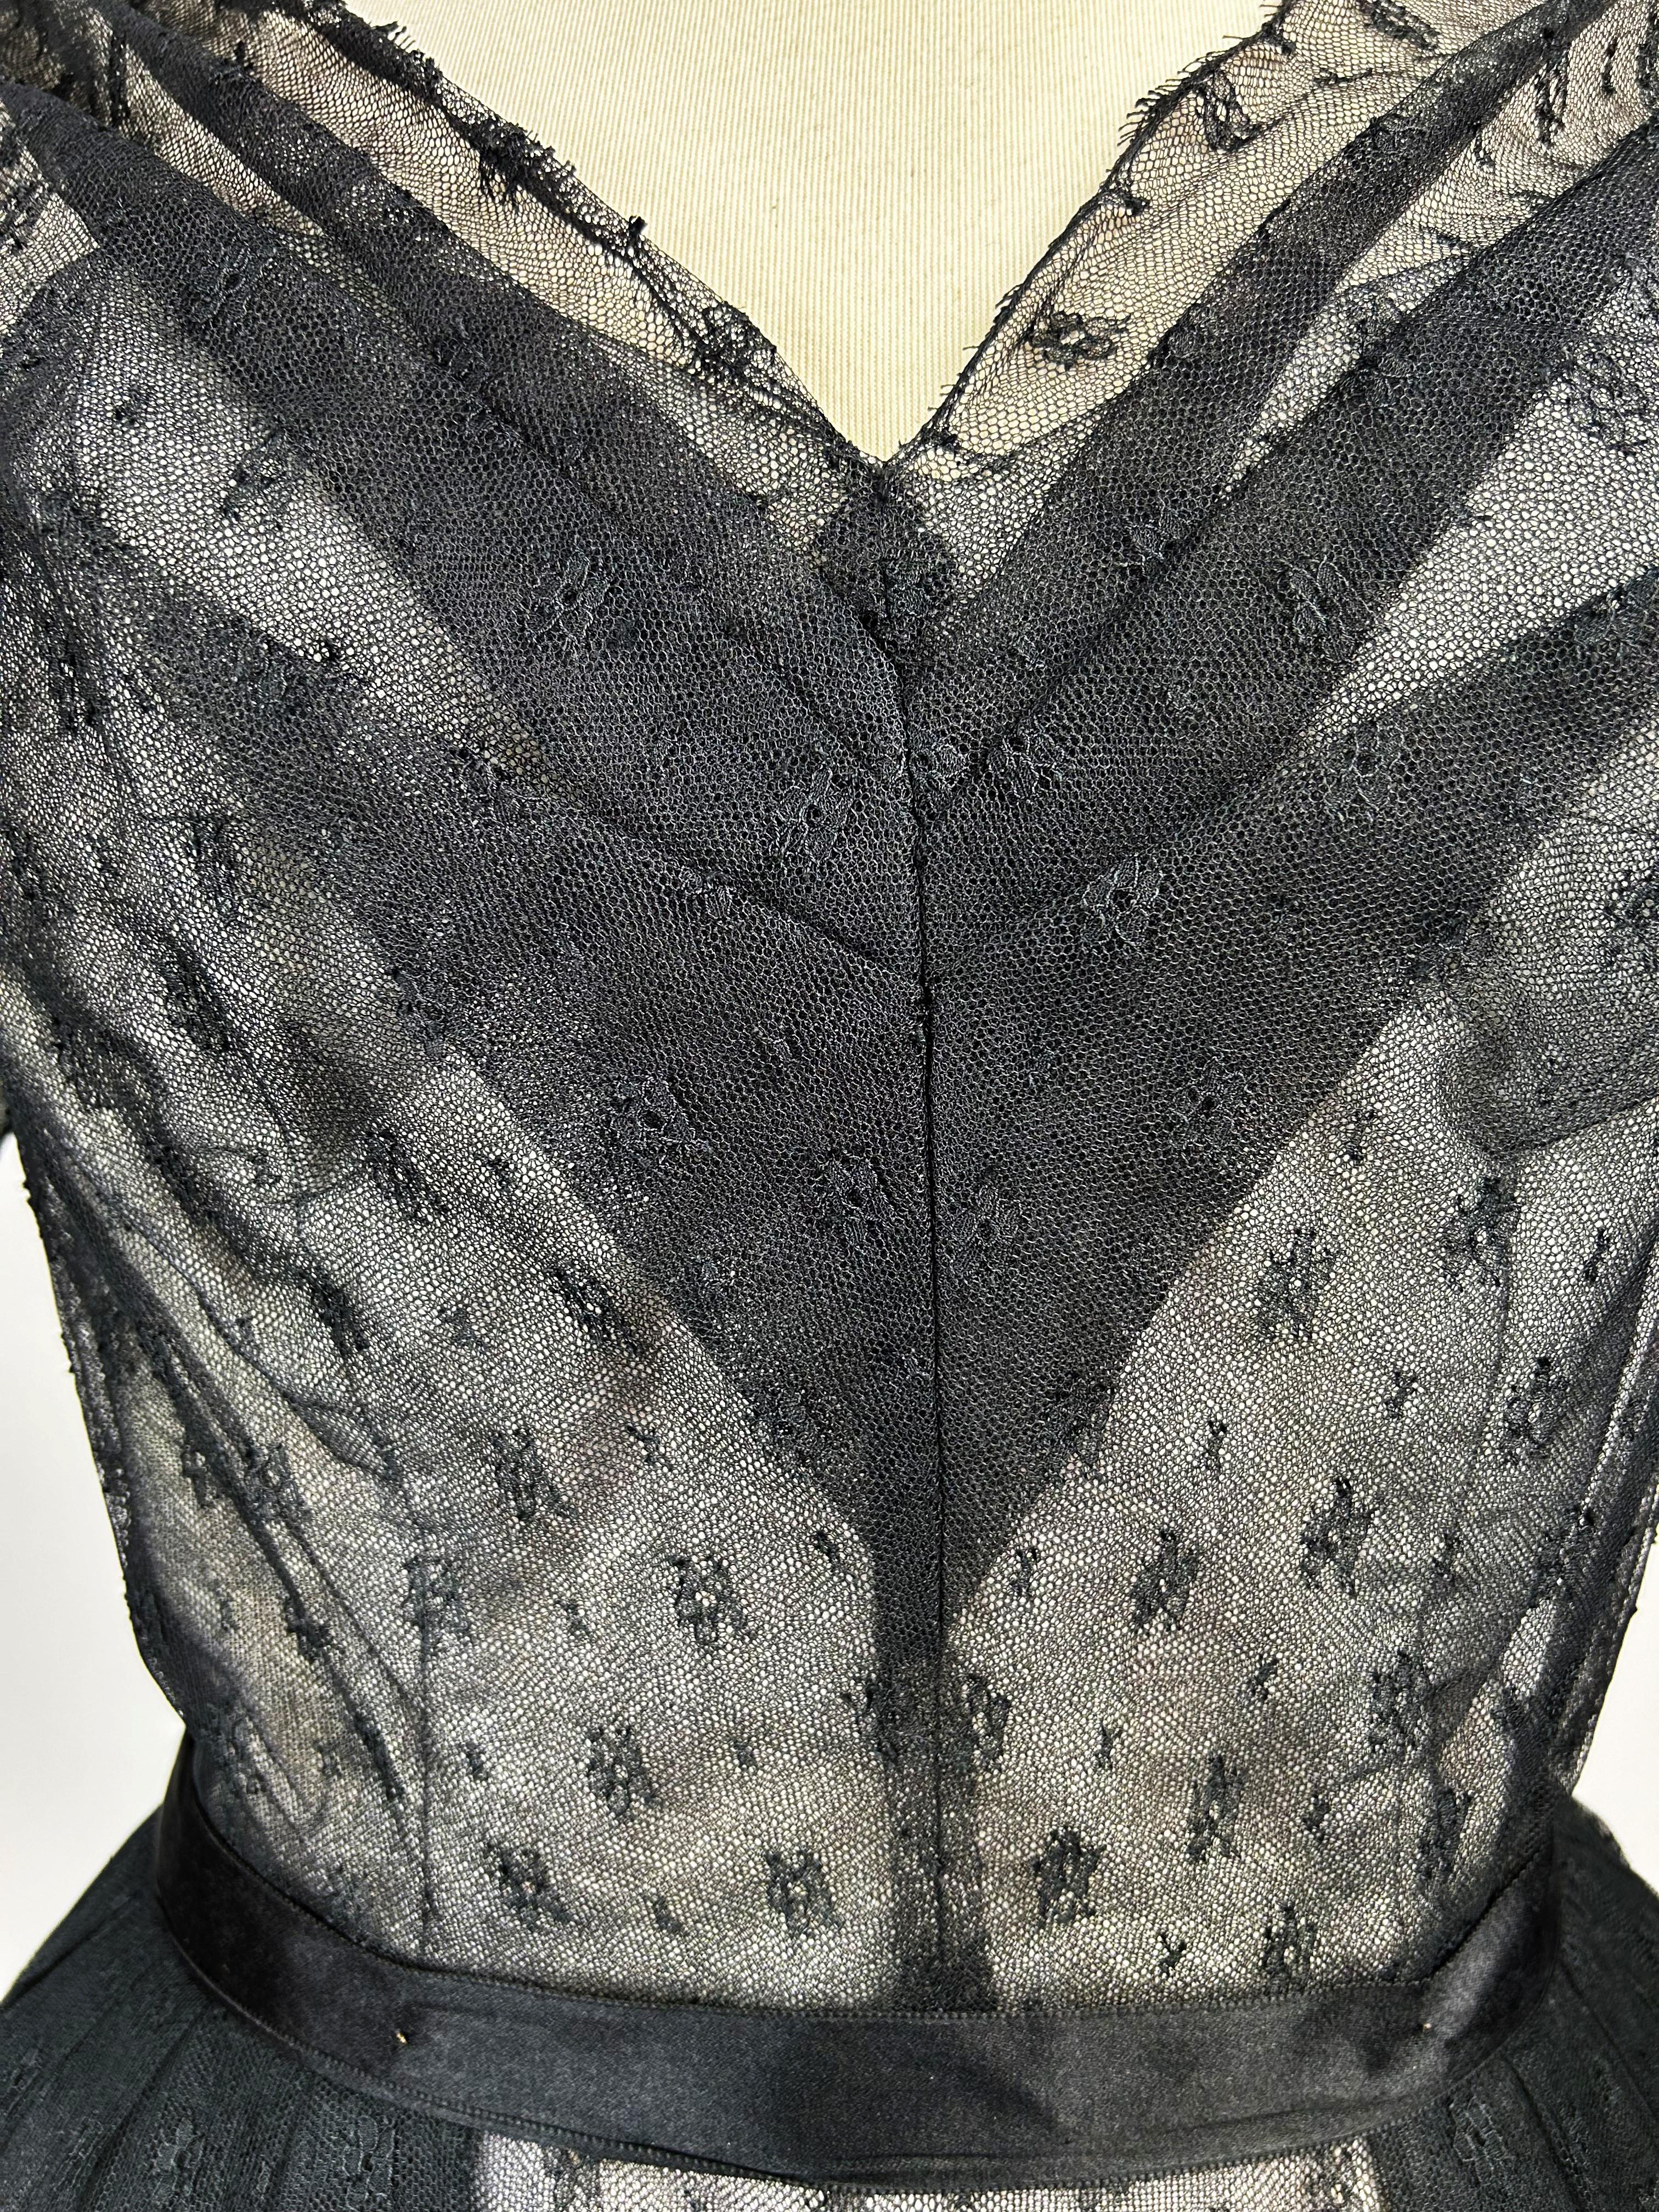 Christian Dior/Saint Laurent Couture Lace Dress (attributed to) Almaviva C.1960 12